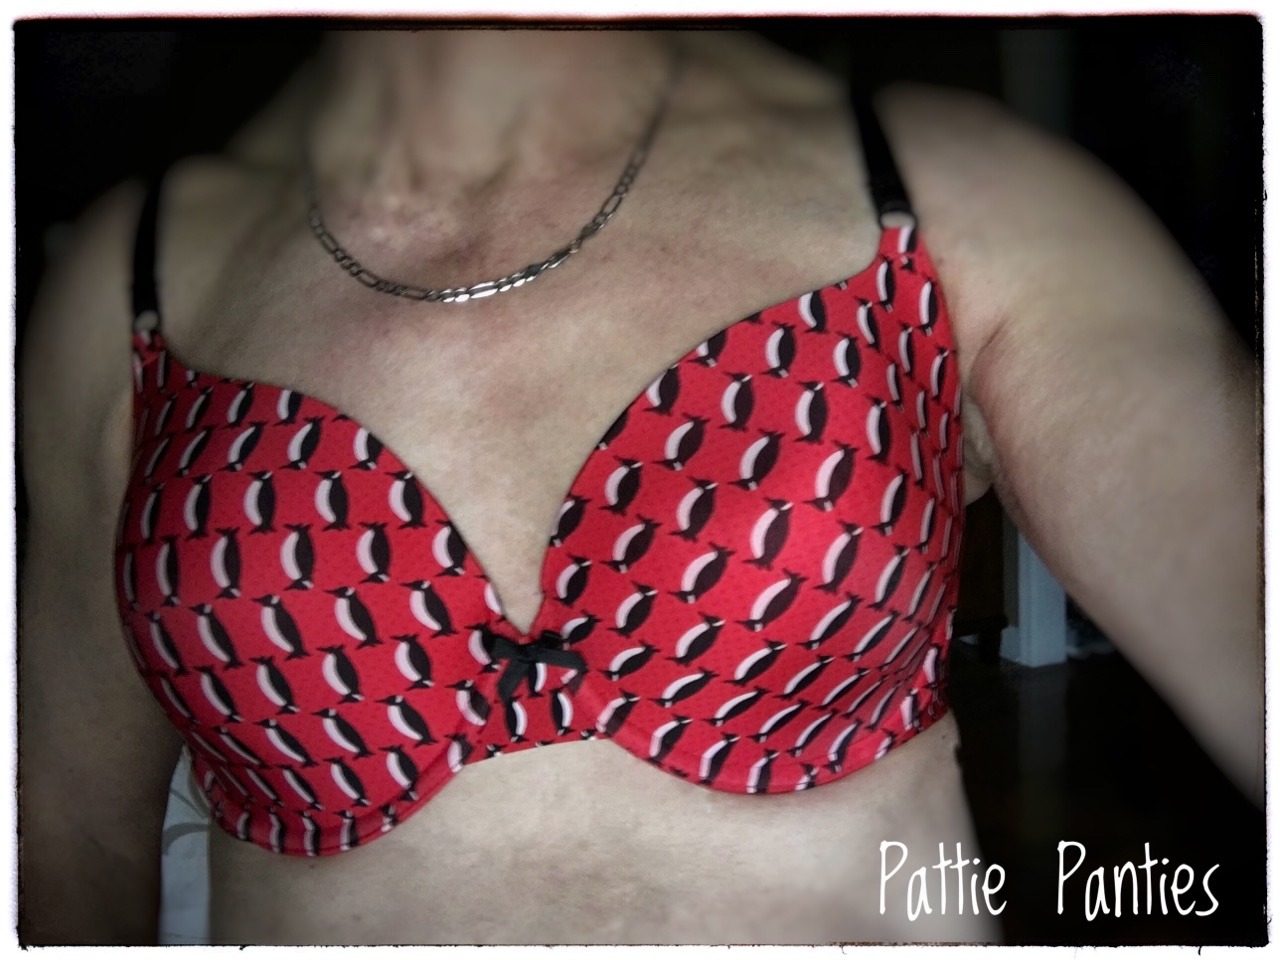 pattiespics:  Bra that my sexy neighbor gave me.  I so enjoy the feeling while wearing